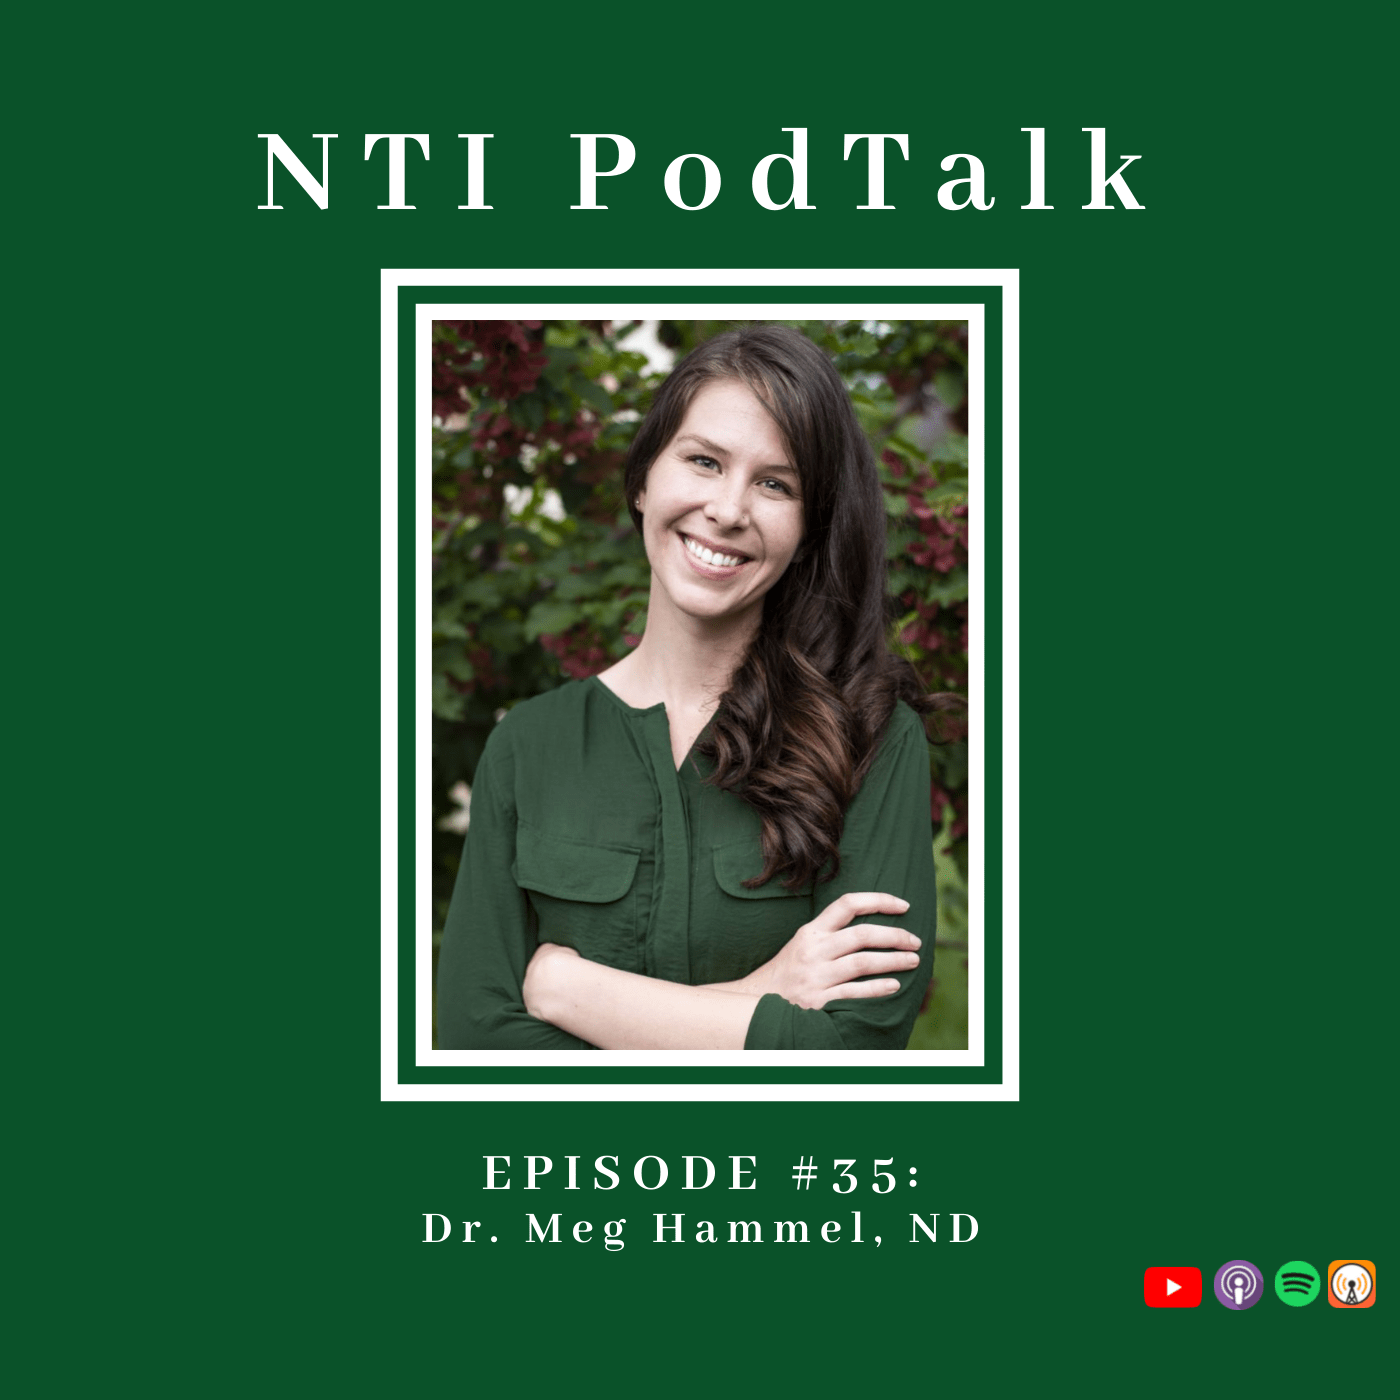 Featured image for “NTI PodTalk with Instructor, Dr. Meg Hammel, ND”